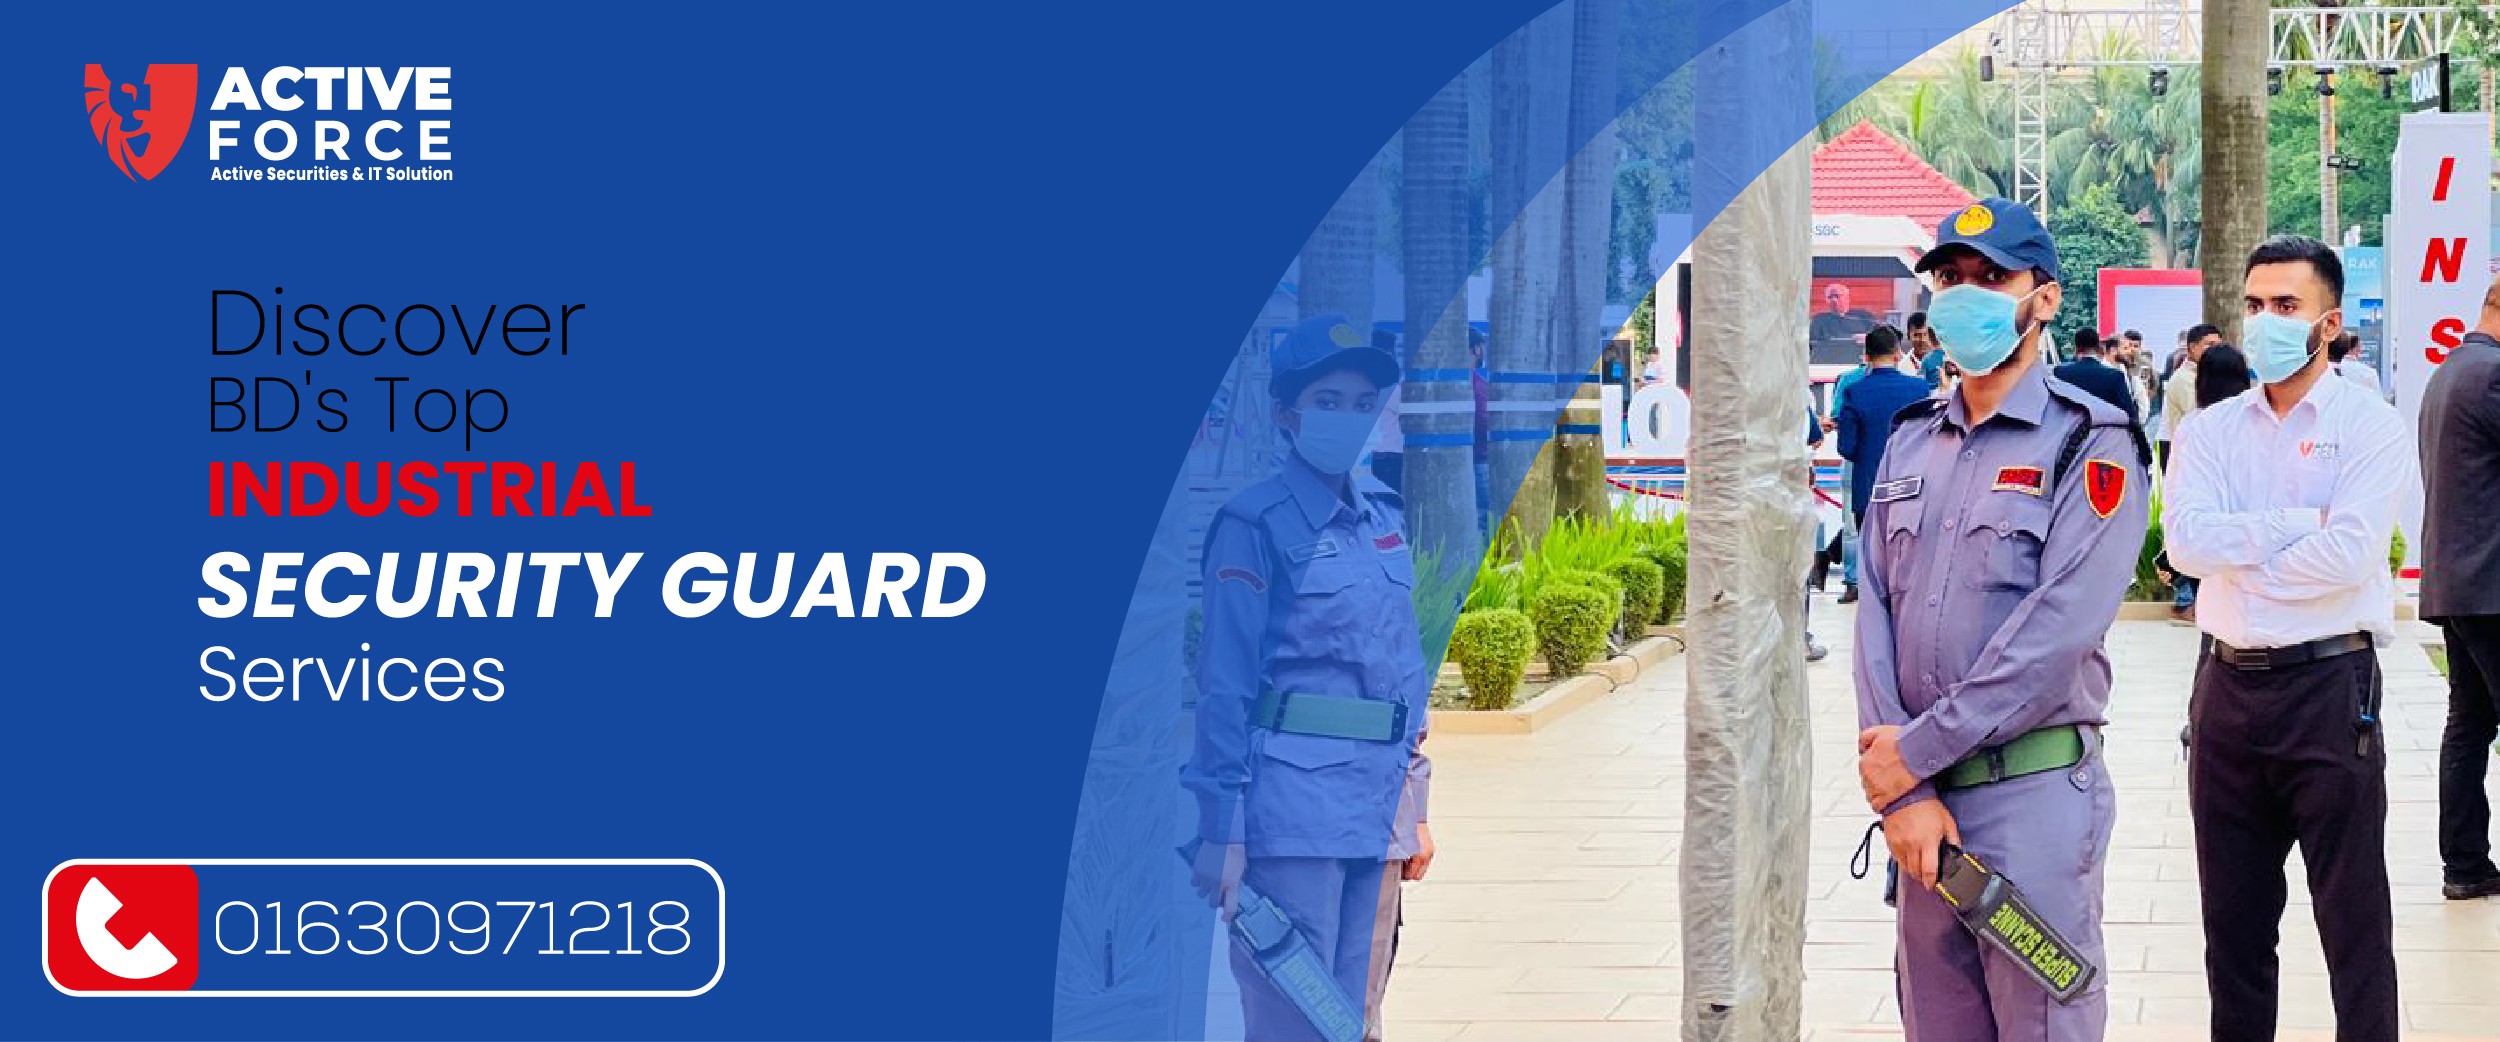 Discover BD's Top Industrial Security Guard Services | Active Force